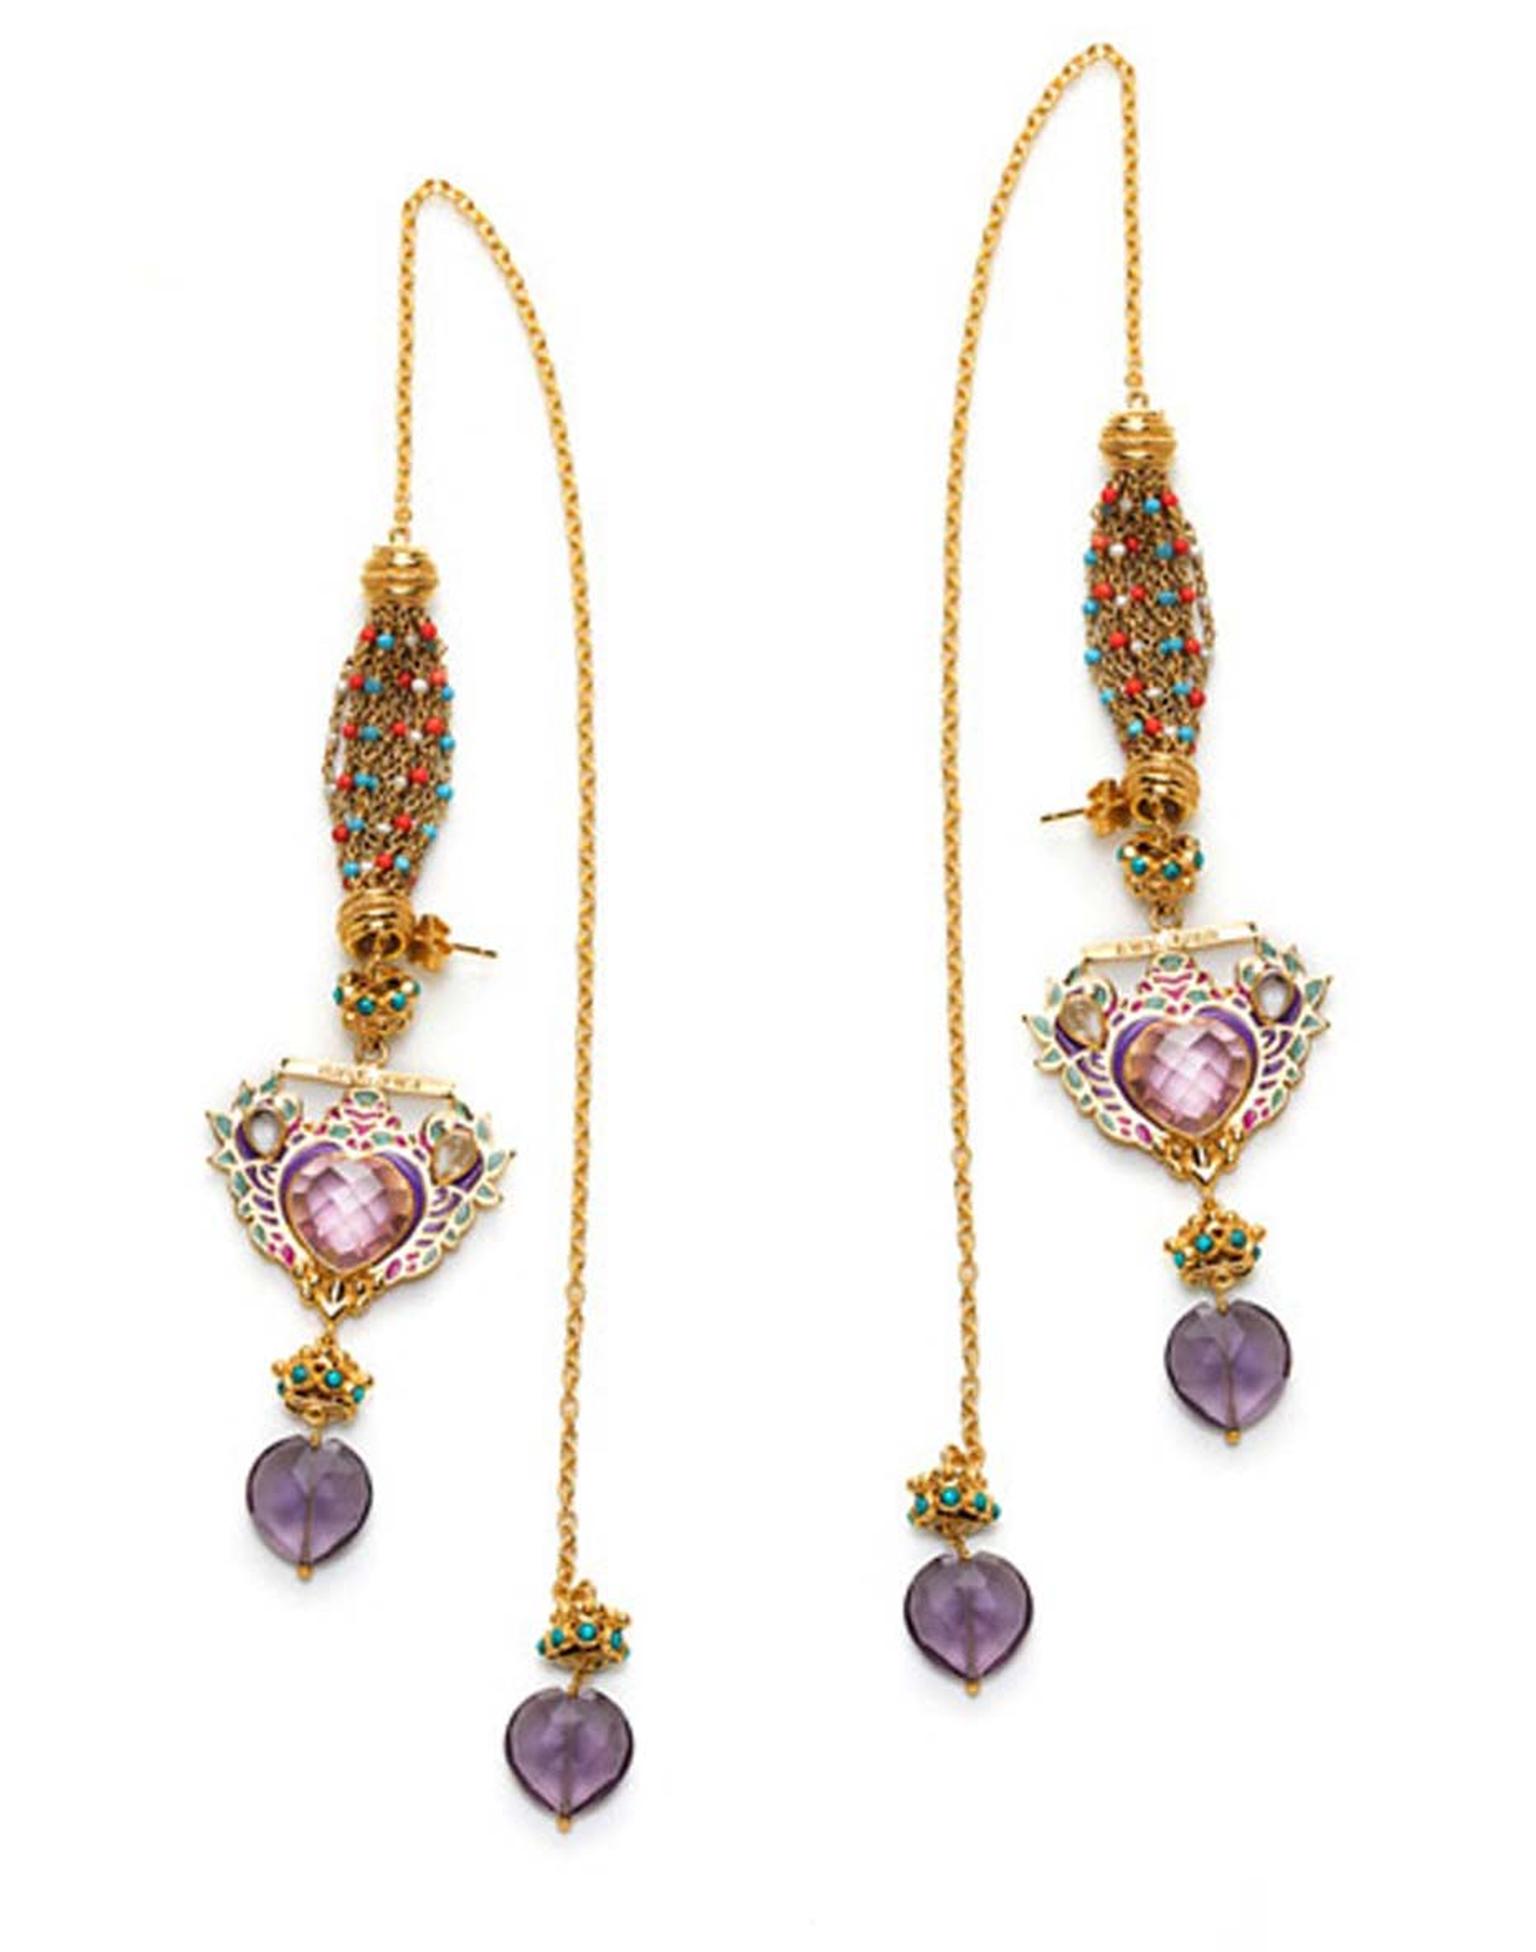 Amrapali Manish Arora earrings with heart-shaped amethysts, enamel work and gold chains.